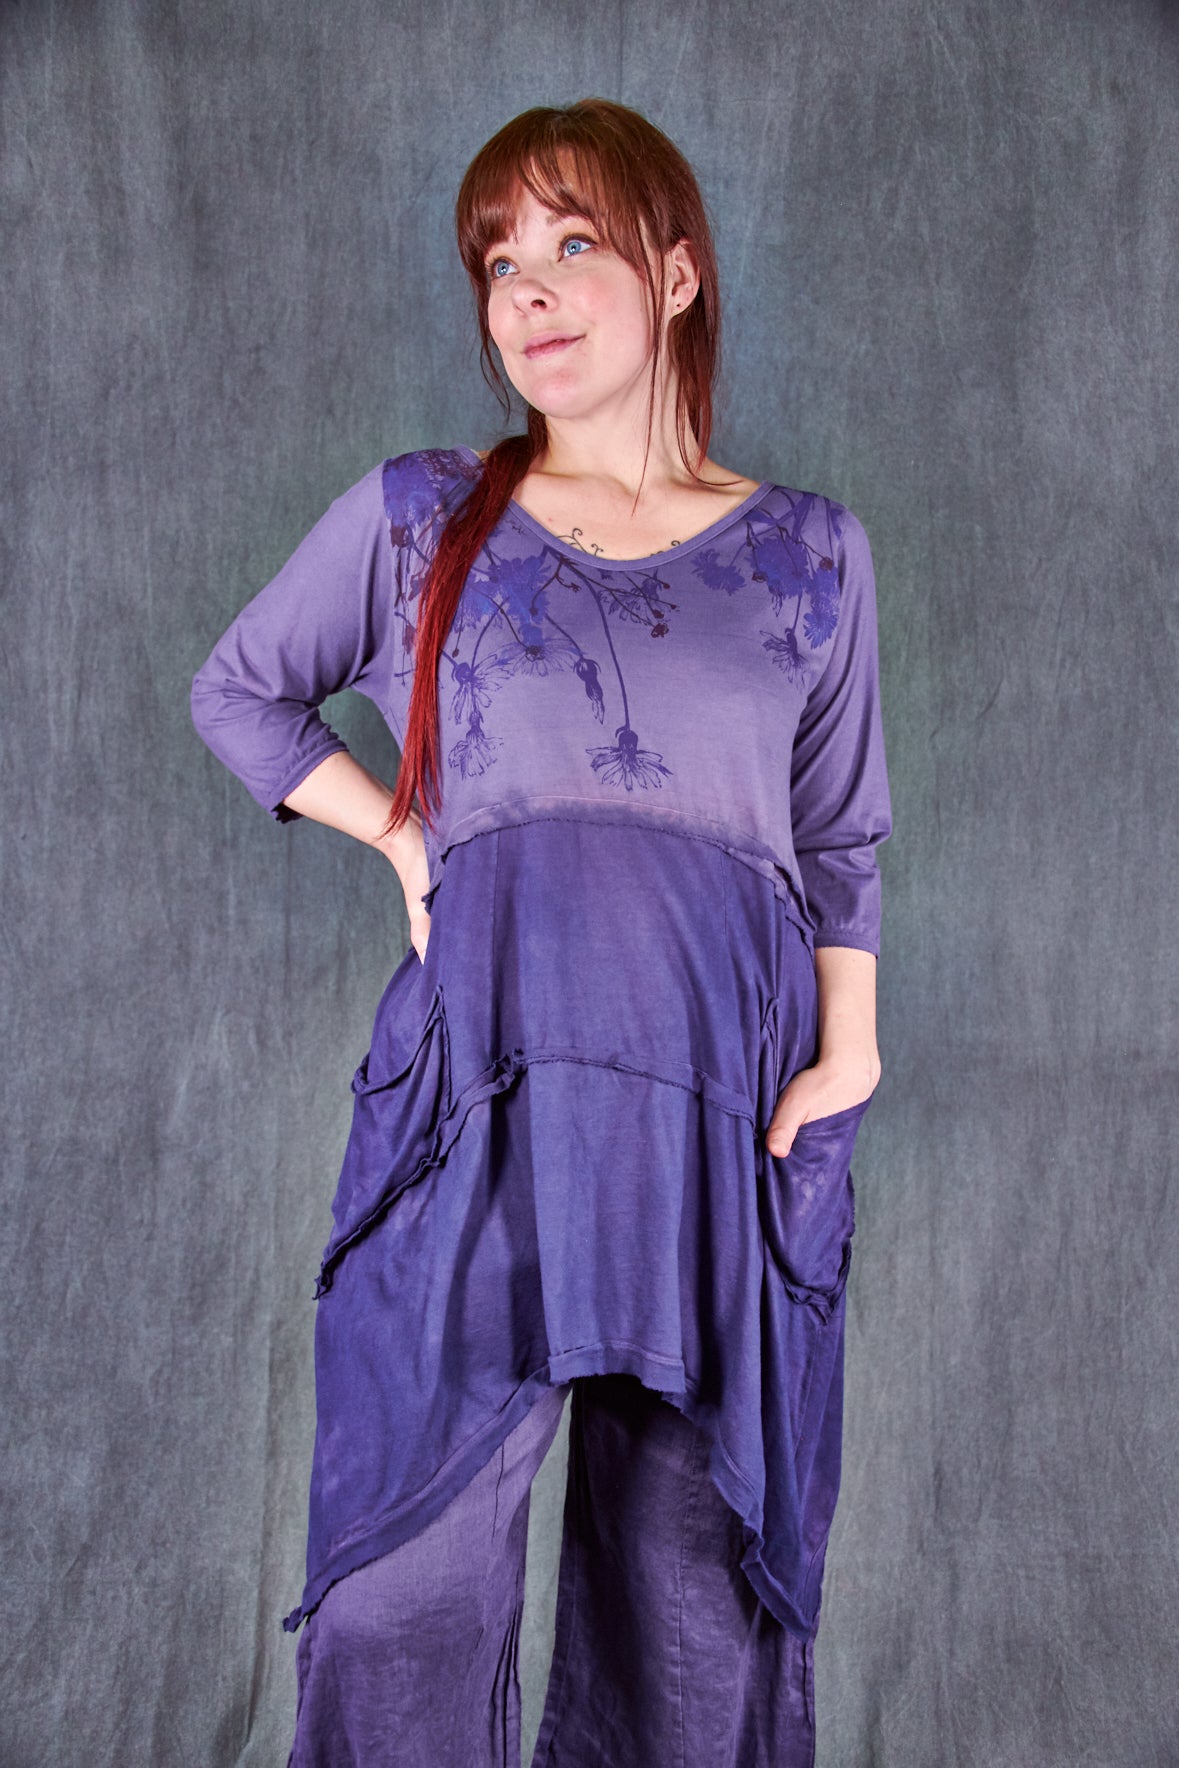 2222HD-Raw Seam Vector Hand Dyed-Violette Blue